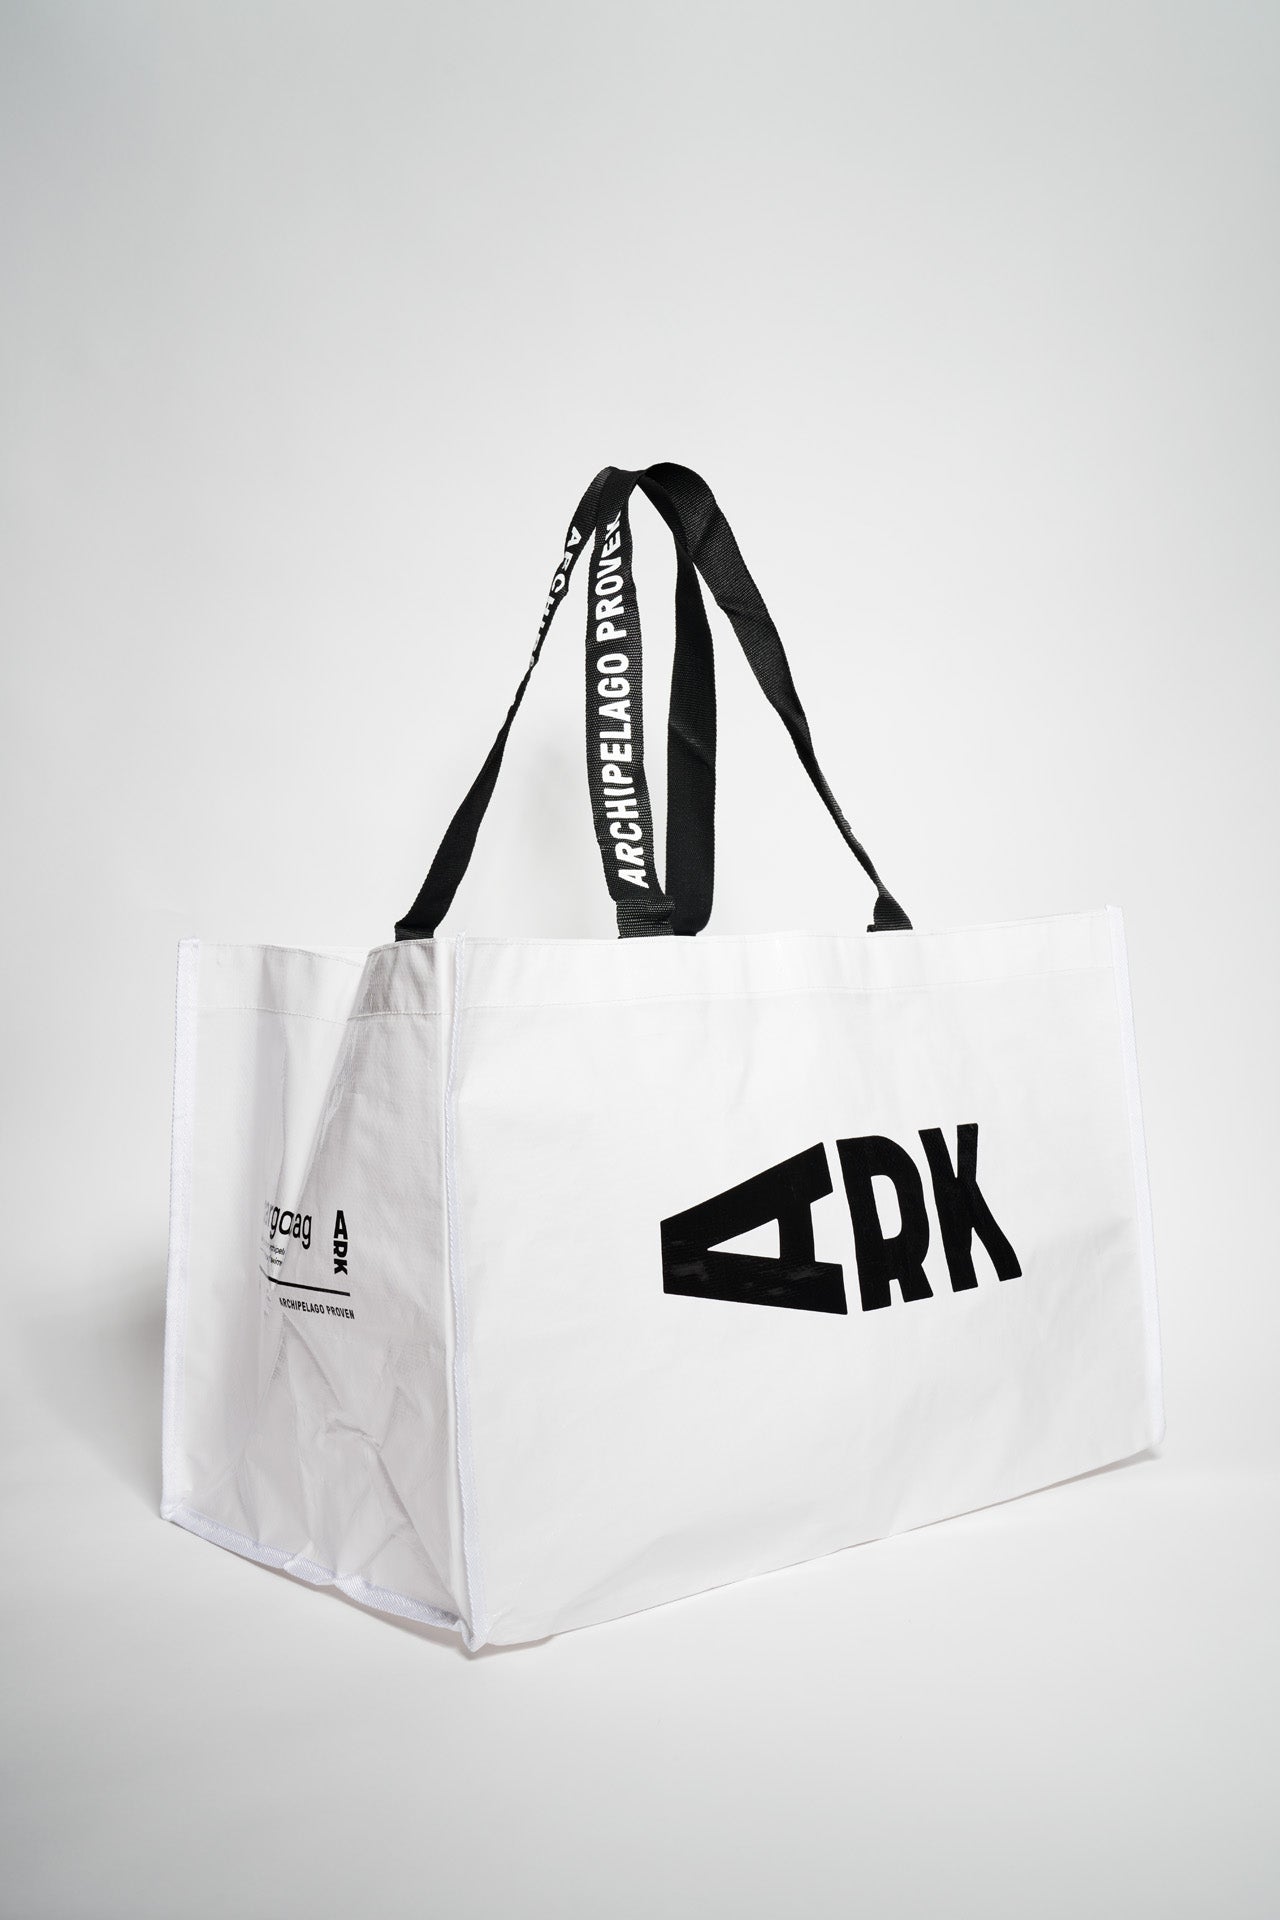 Product photo of ARK Cargo Bag